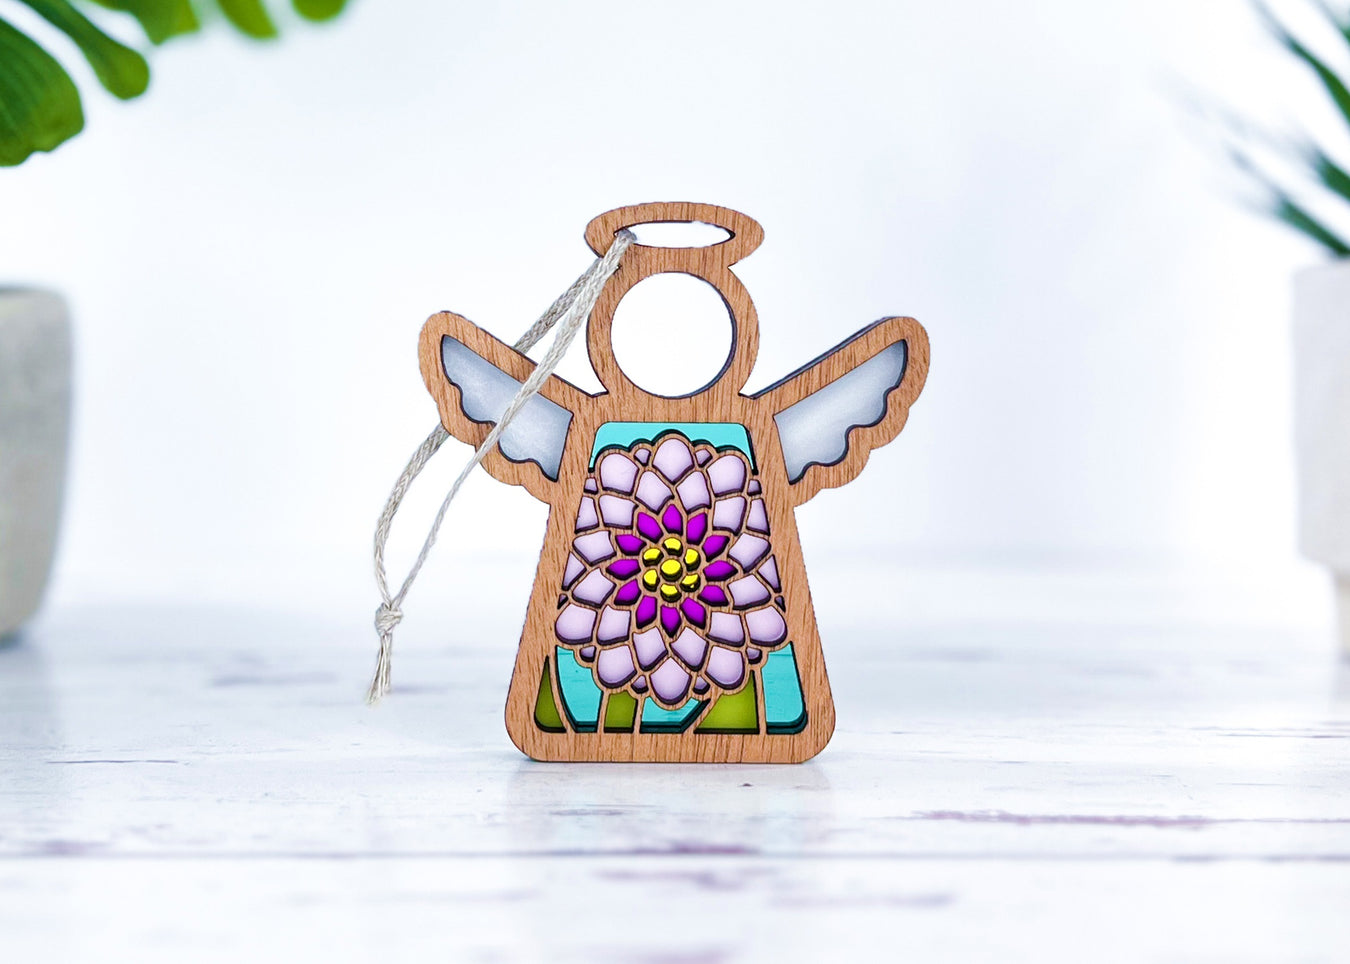 Angel ornaments featuring the November birth month flower, ideal birthday gift idea for a wife, best friend or special women, showcasing a vibrant chrysanthemum birth flower in a stained glass inspired style.